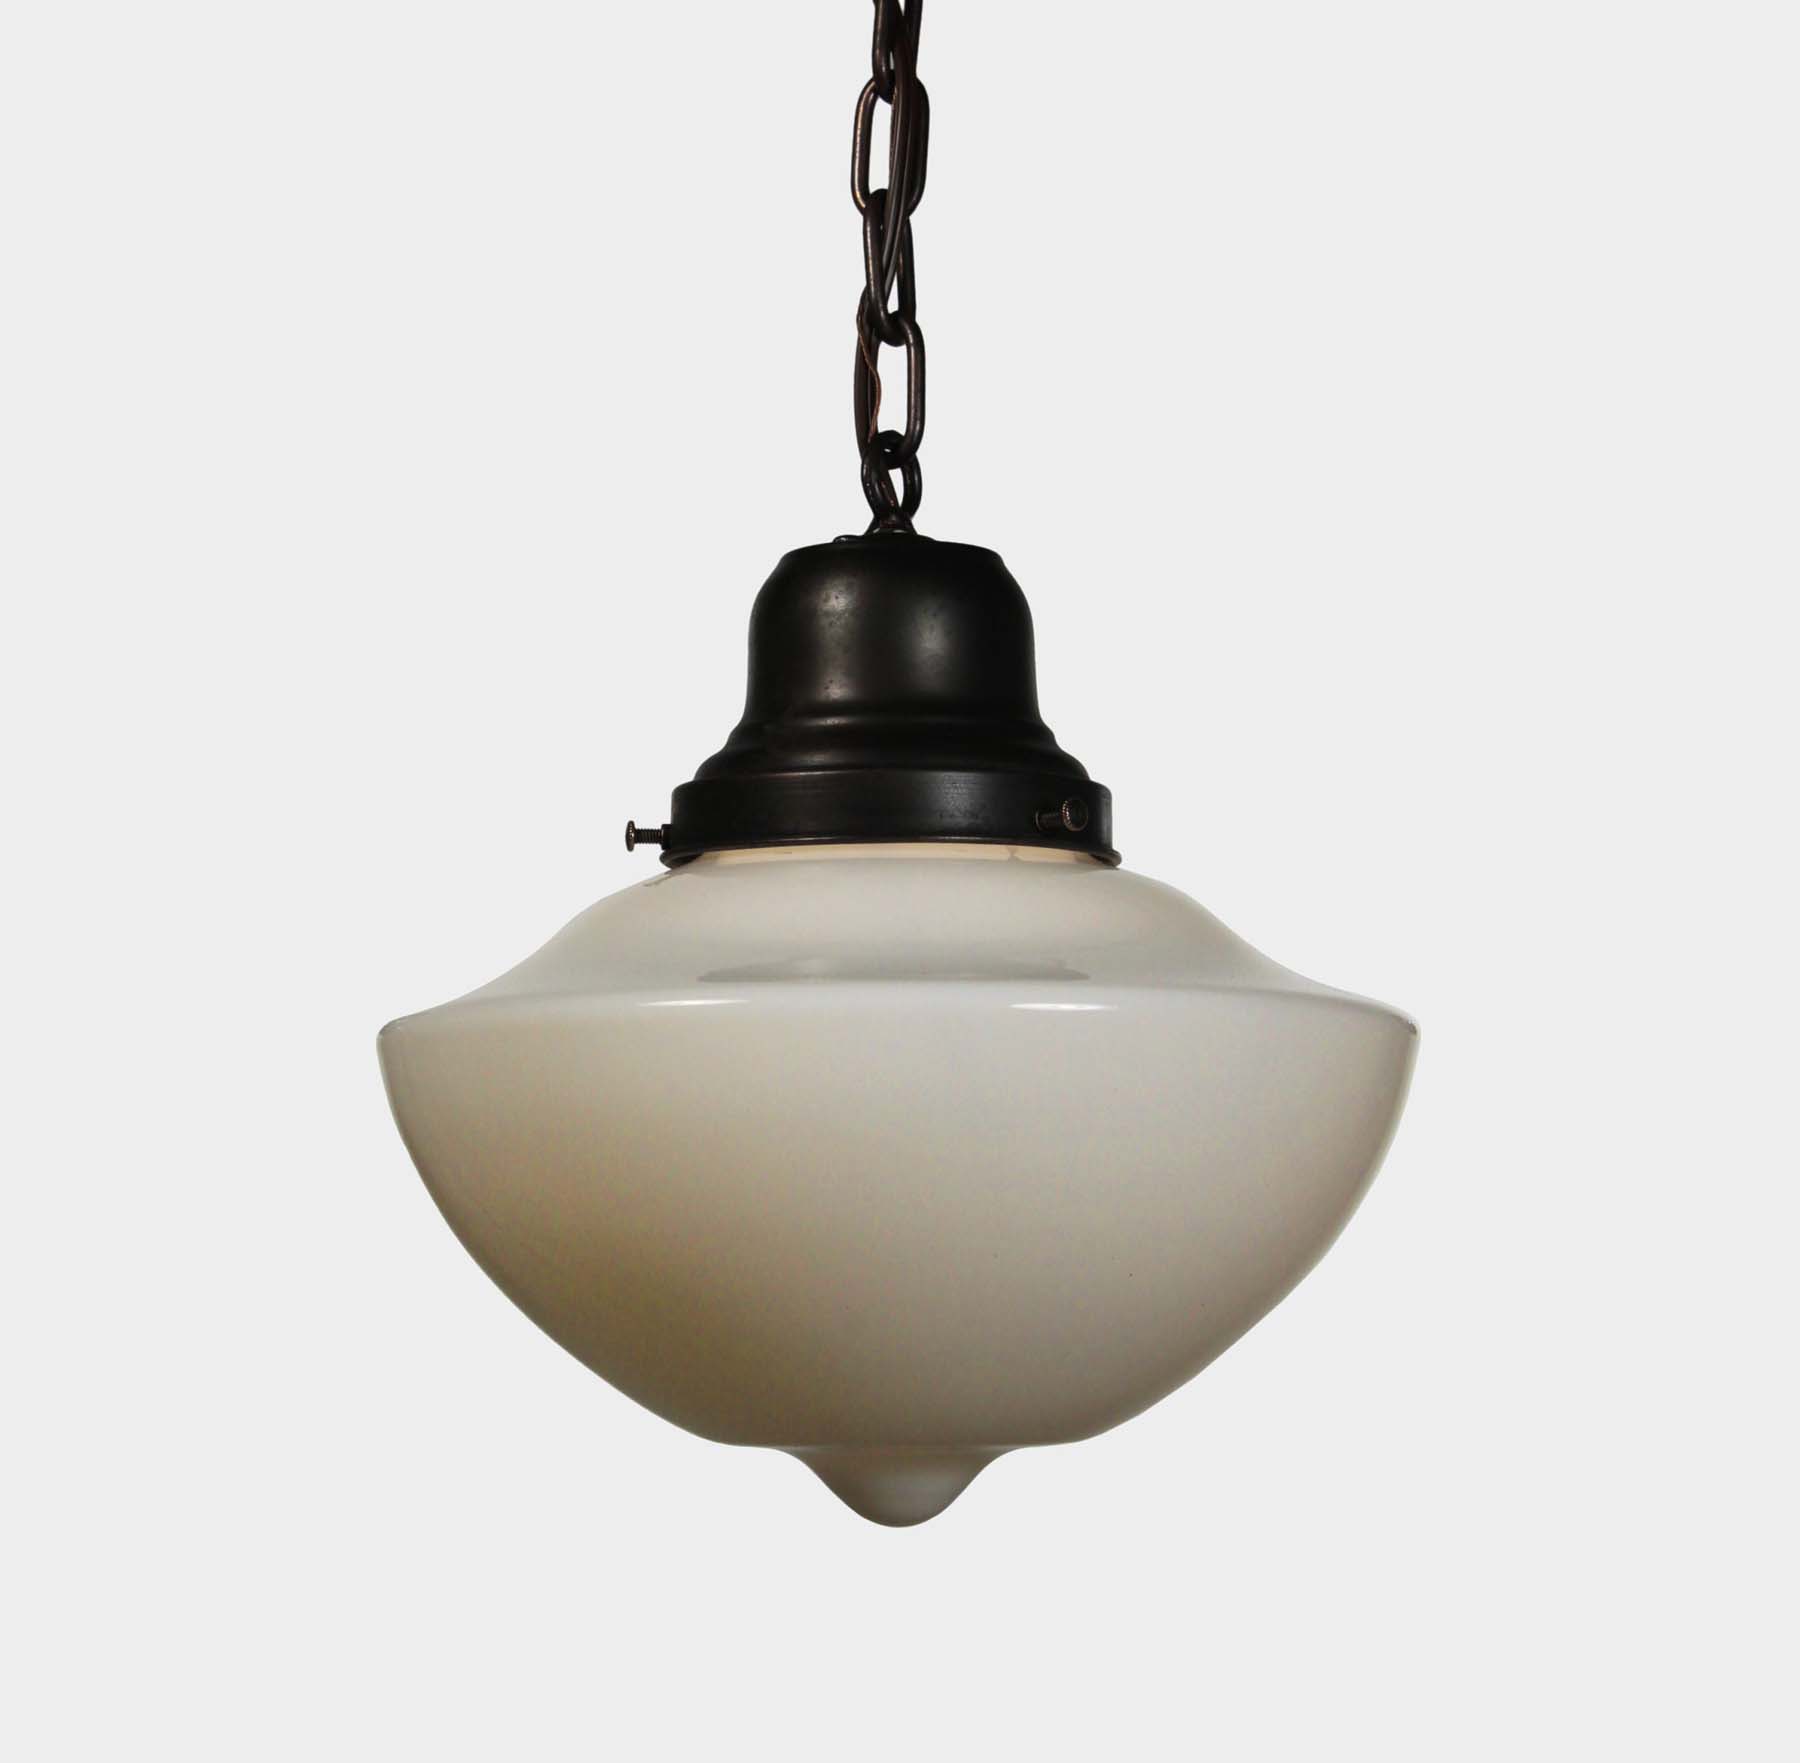 SOLD Antique Schoolhouse Pendant Light with Unusual Shade-68411